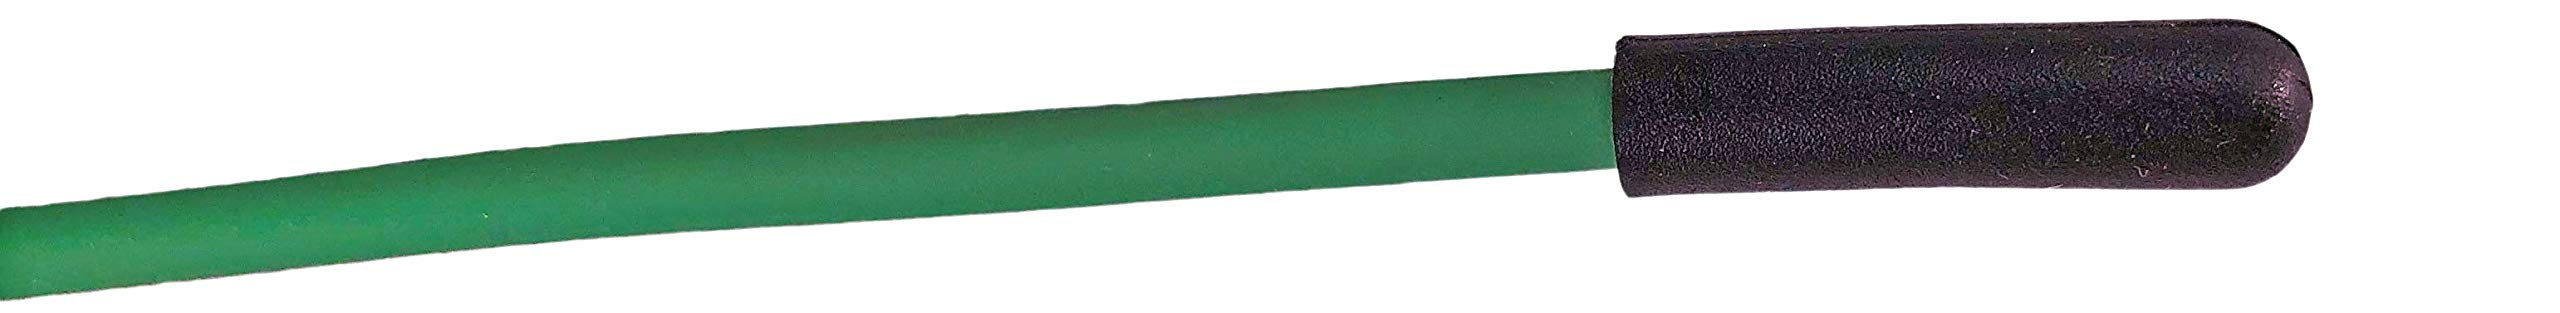 Wholesale Sensors Replacement for Traulsen 334-60405-02 Green Cabinet Temperature Sensor 74" 24 Month Warranty